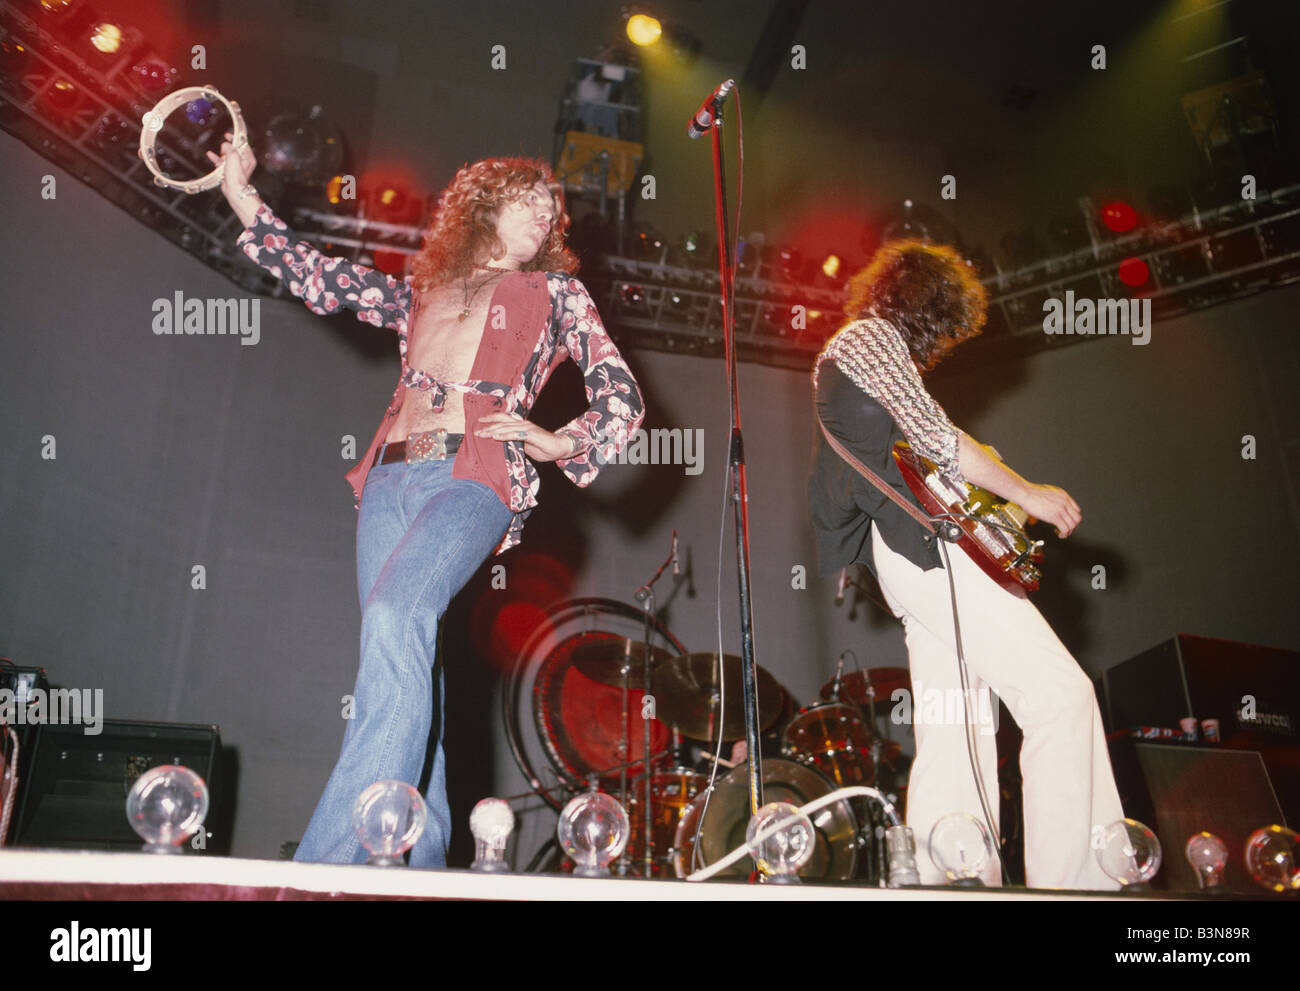 JIMMY PAGE & ROBERT PLANT LED ZEPPELIN IN CONCERT ON STAGE PUBLICITY PHOTO 